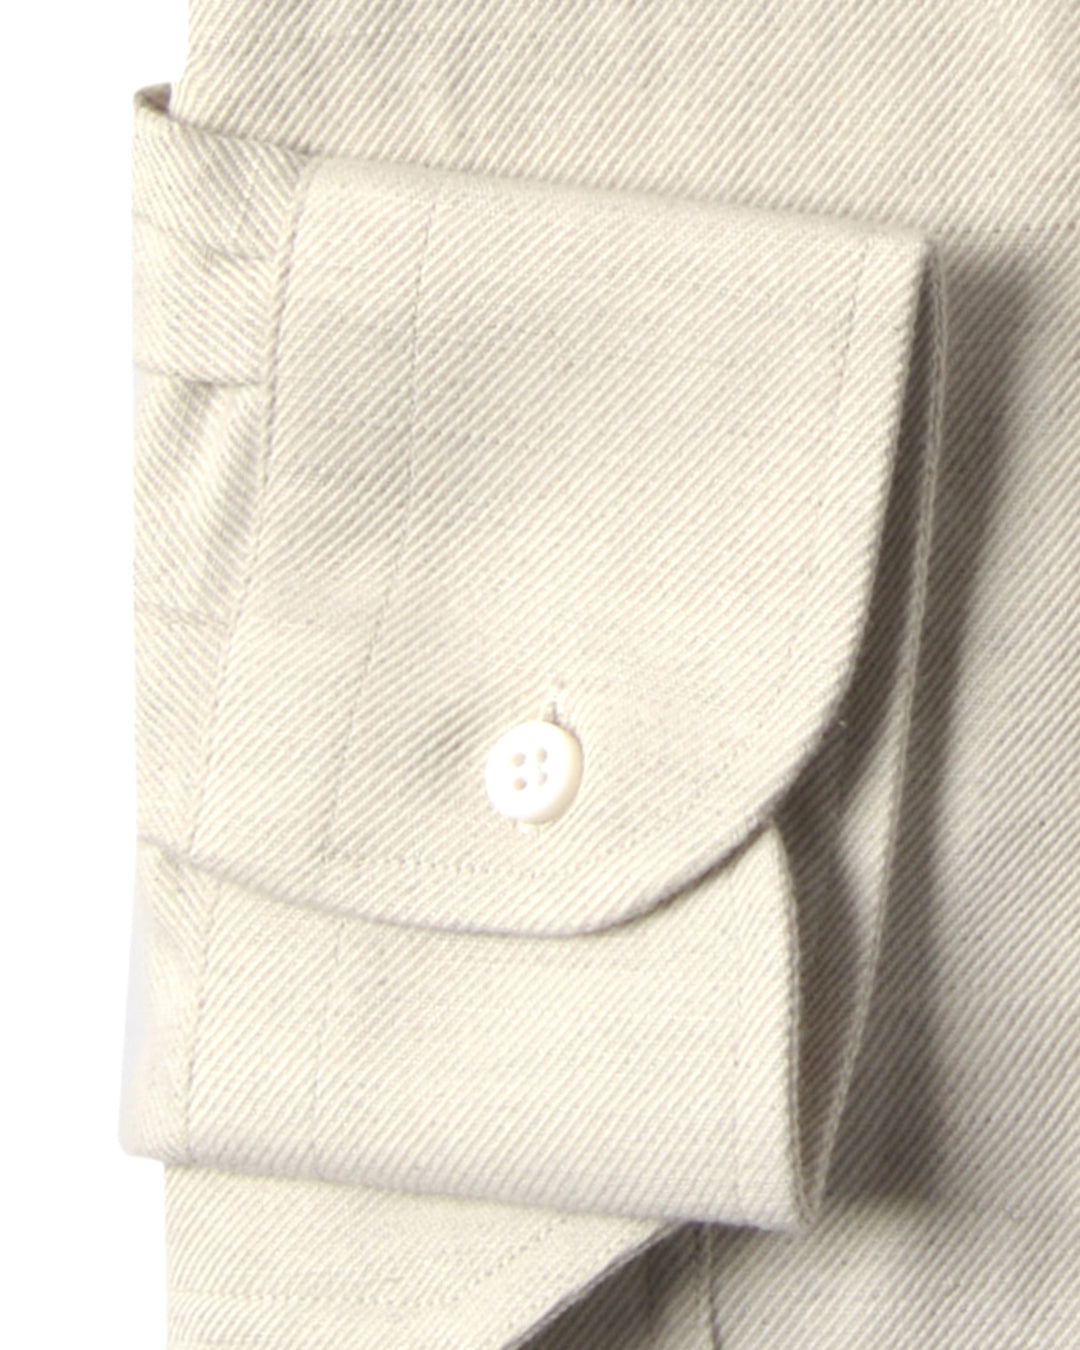 Cuff of the custom linen shirt for men in cream twill by Luxire Clothing